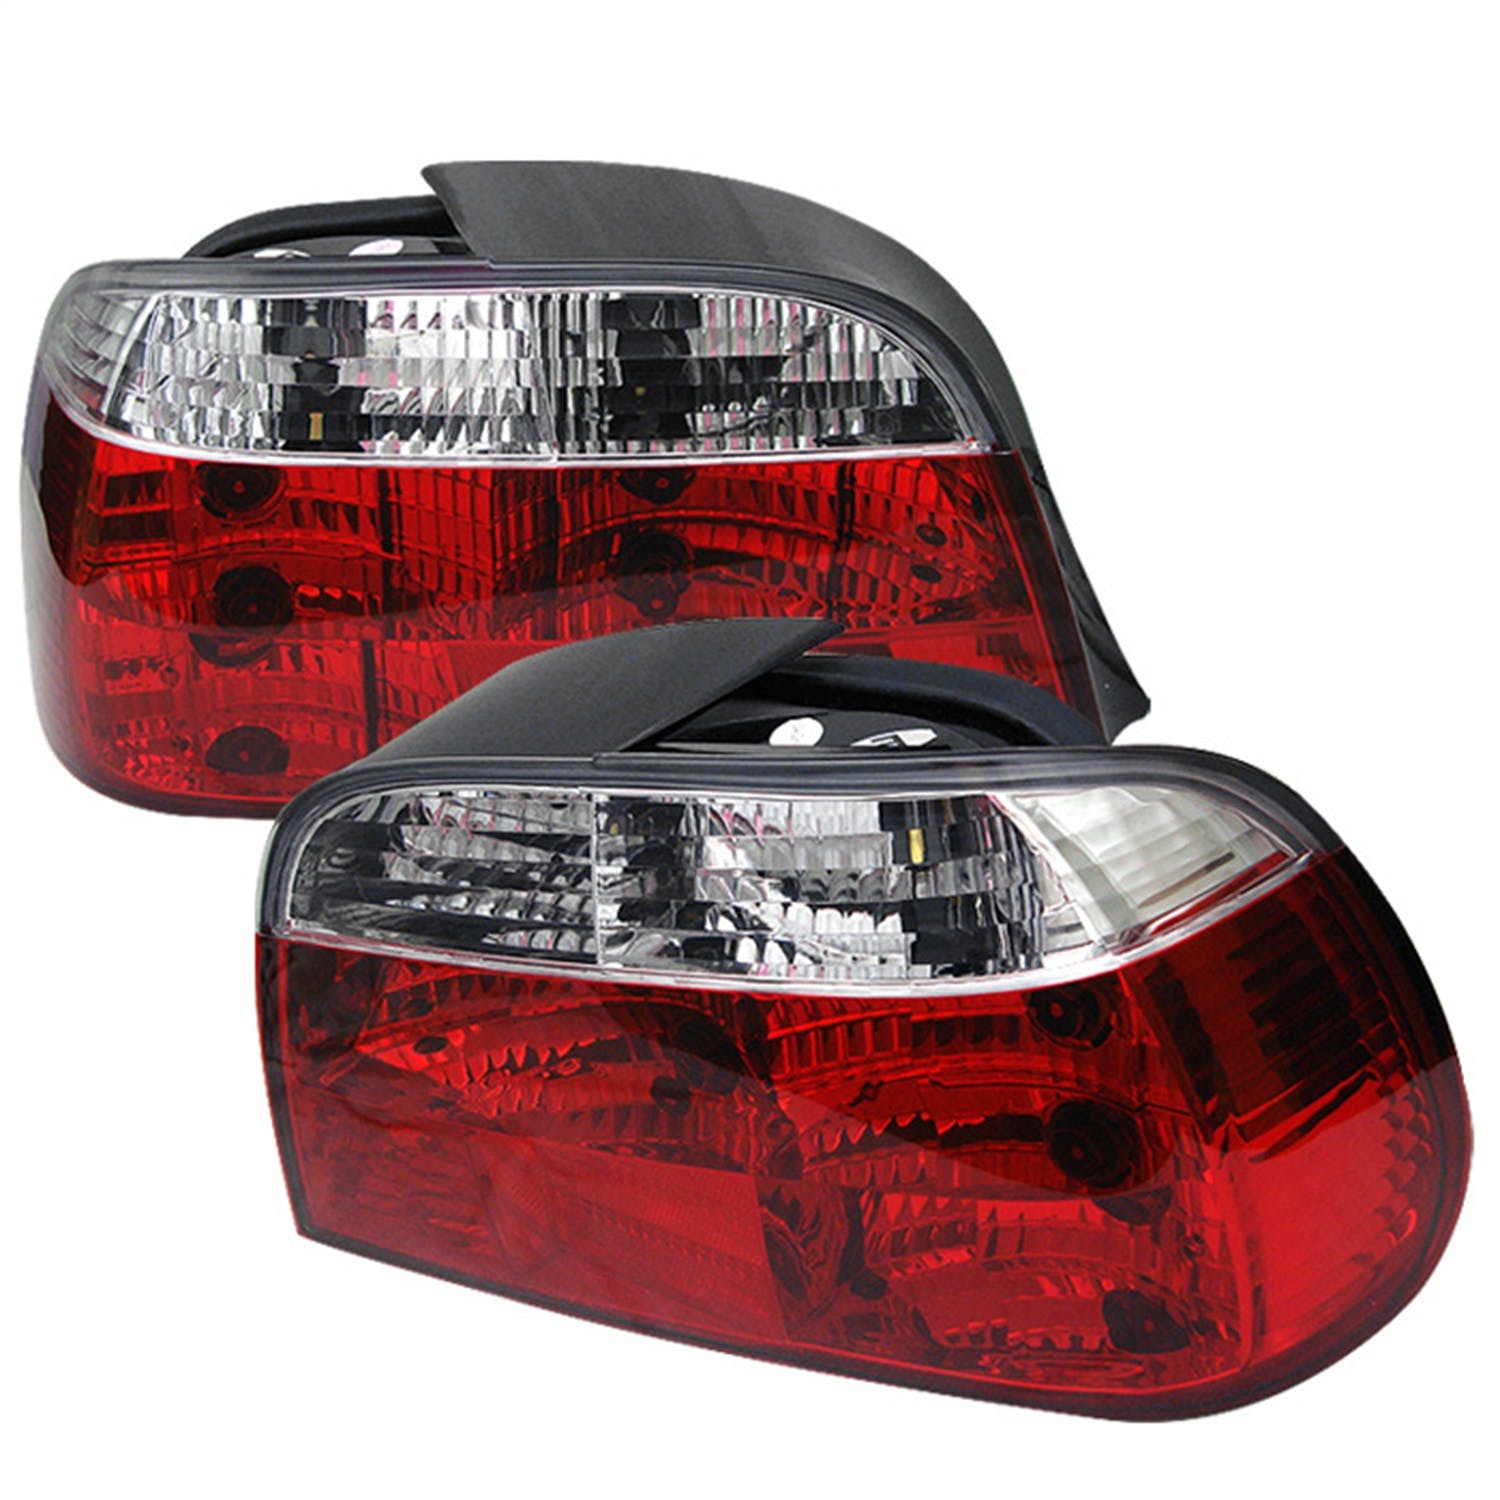 Spyder Auto 5000651 (Spyder) BMW E38 7-Series 95-01 Crystal Tail Lights-Red Clear